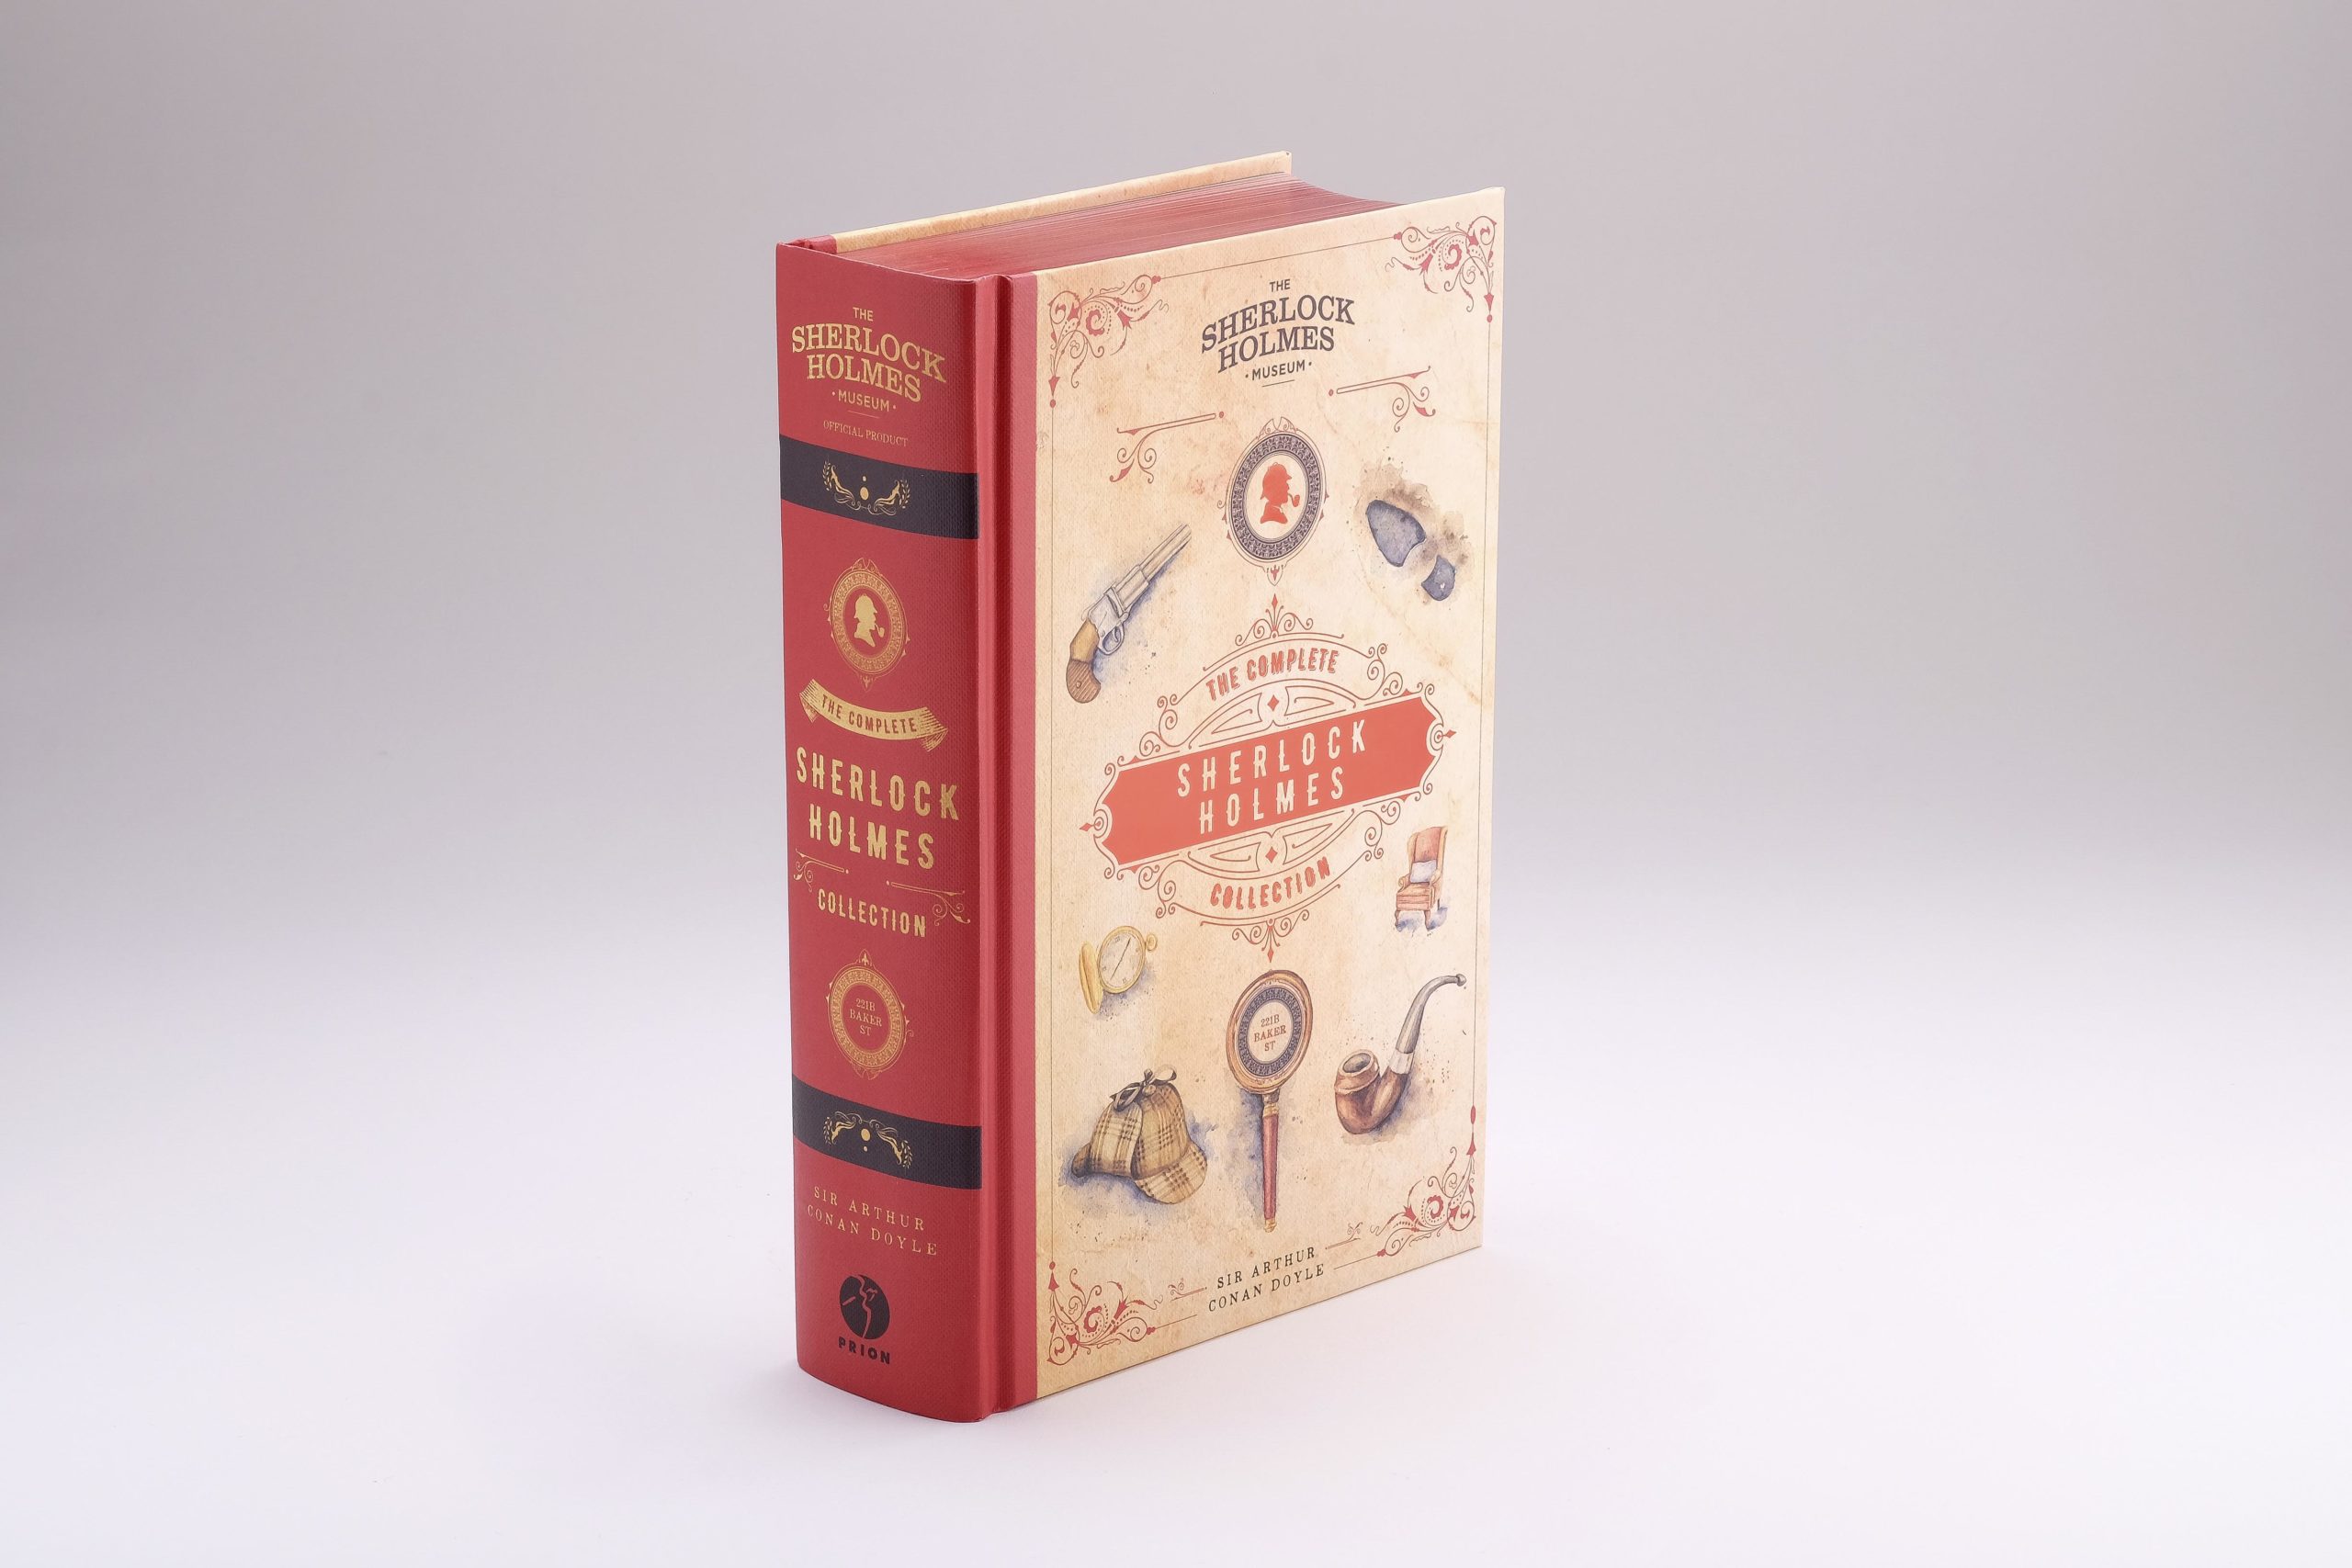 A closed copy of the complete collection book, a cream cover with red spine